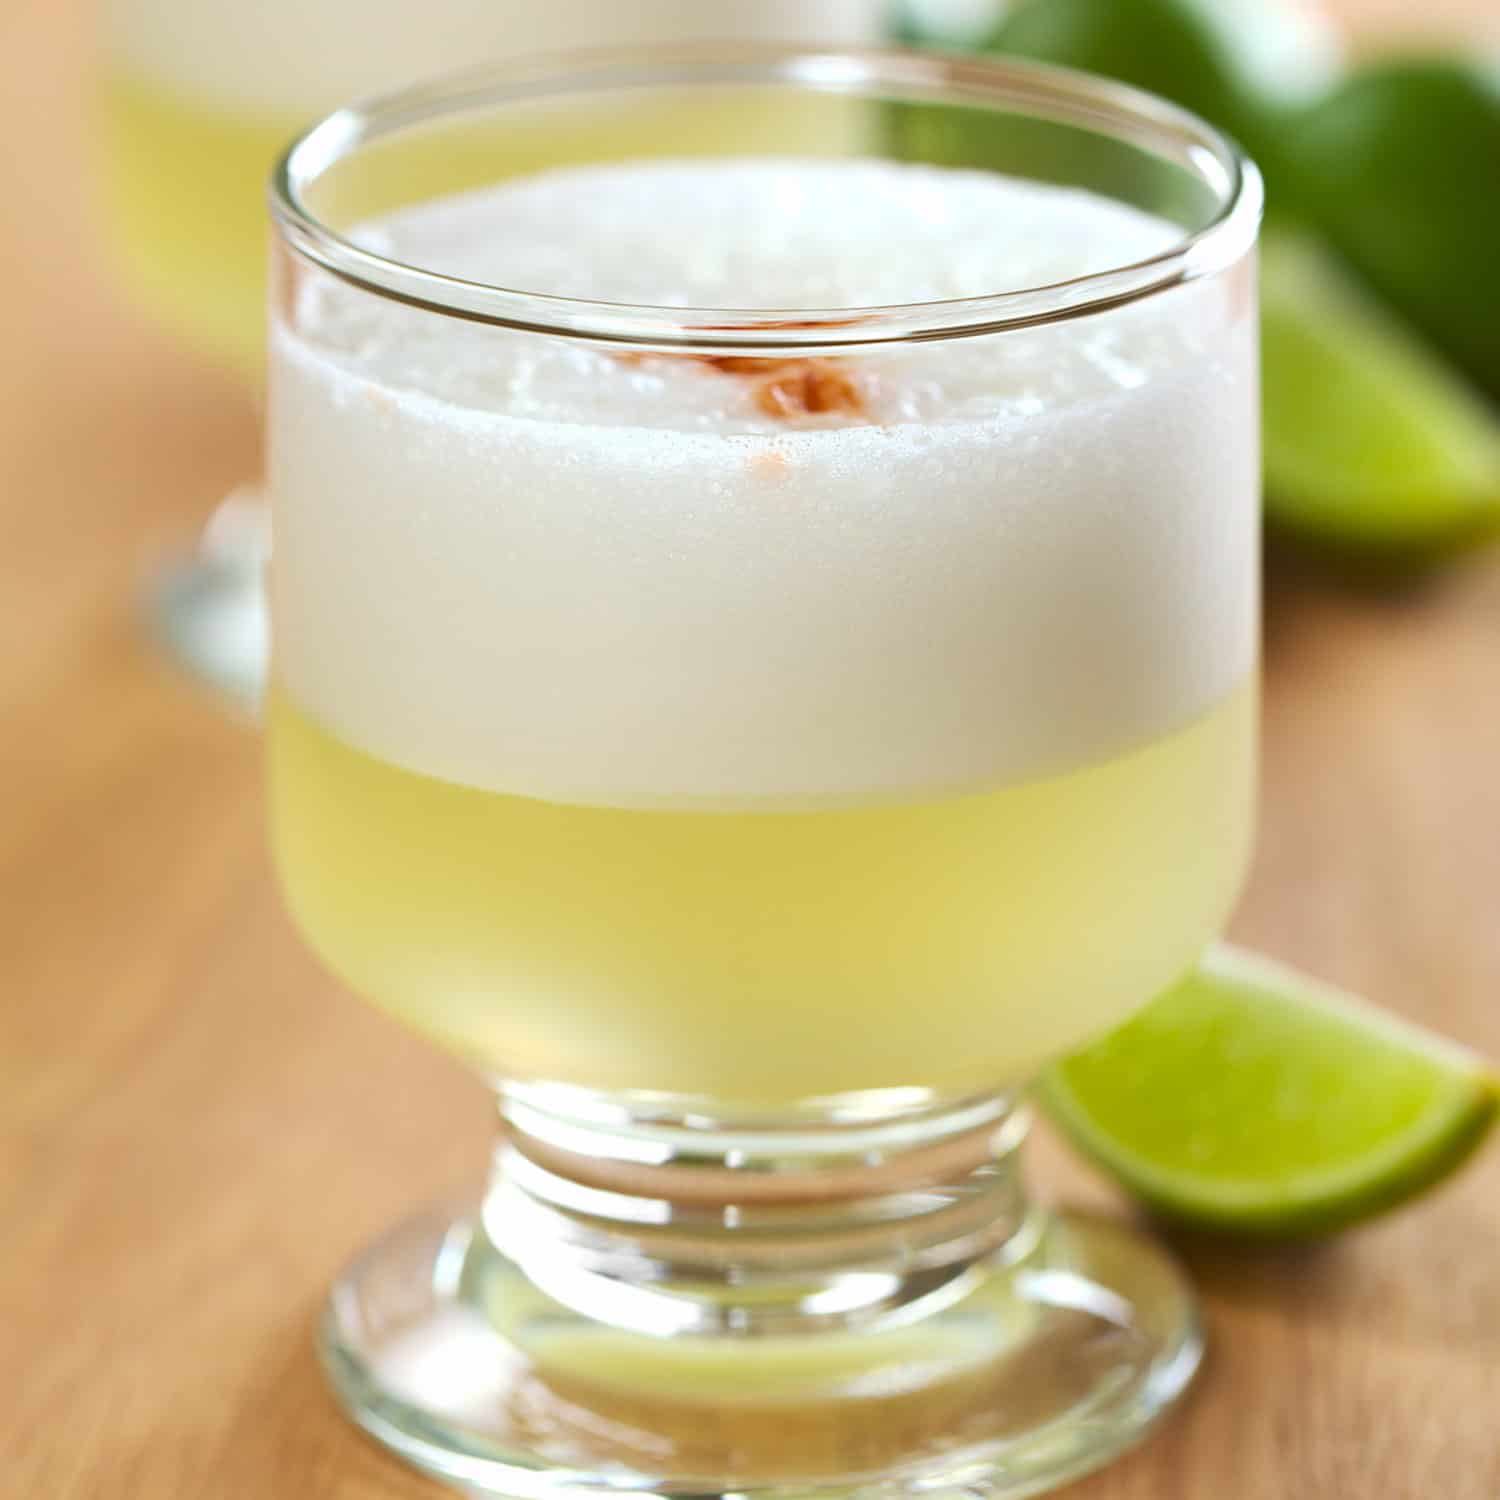 What Is Pisco?